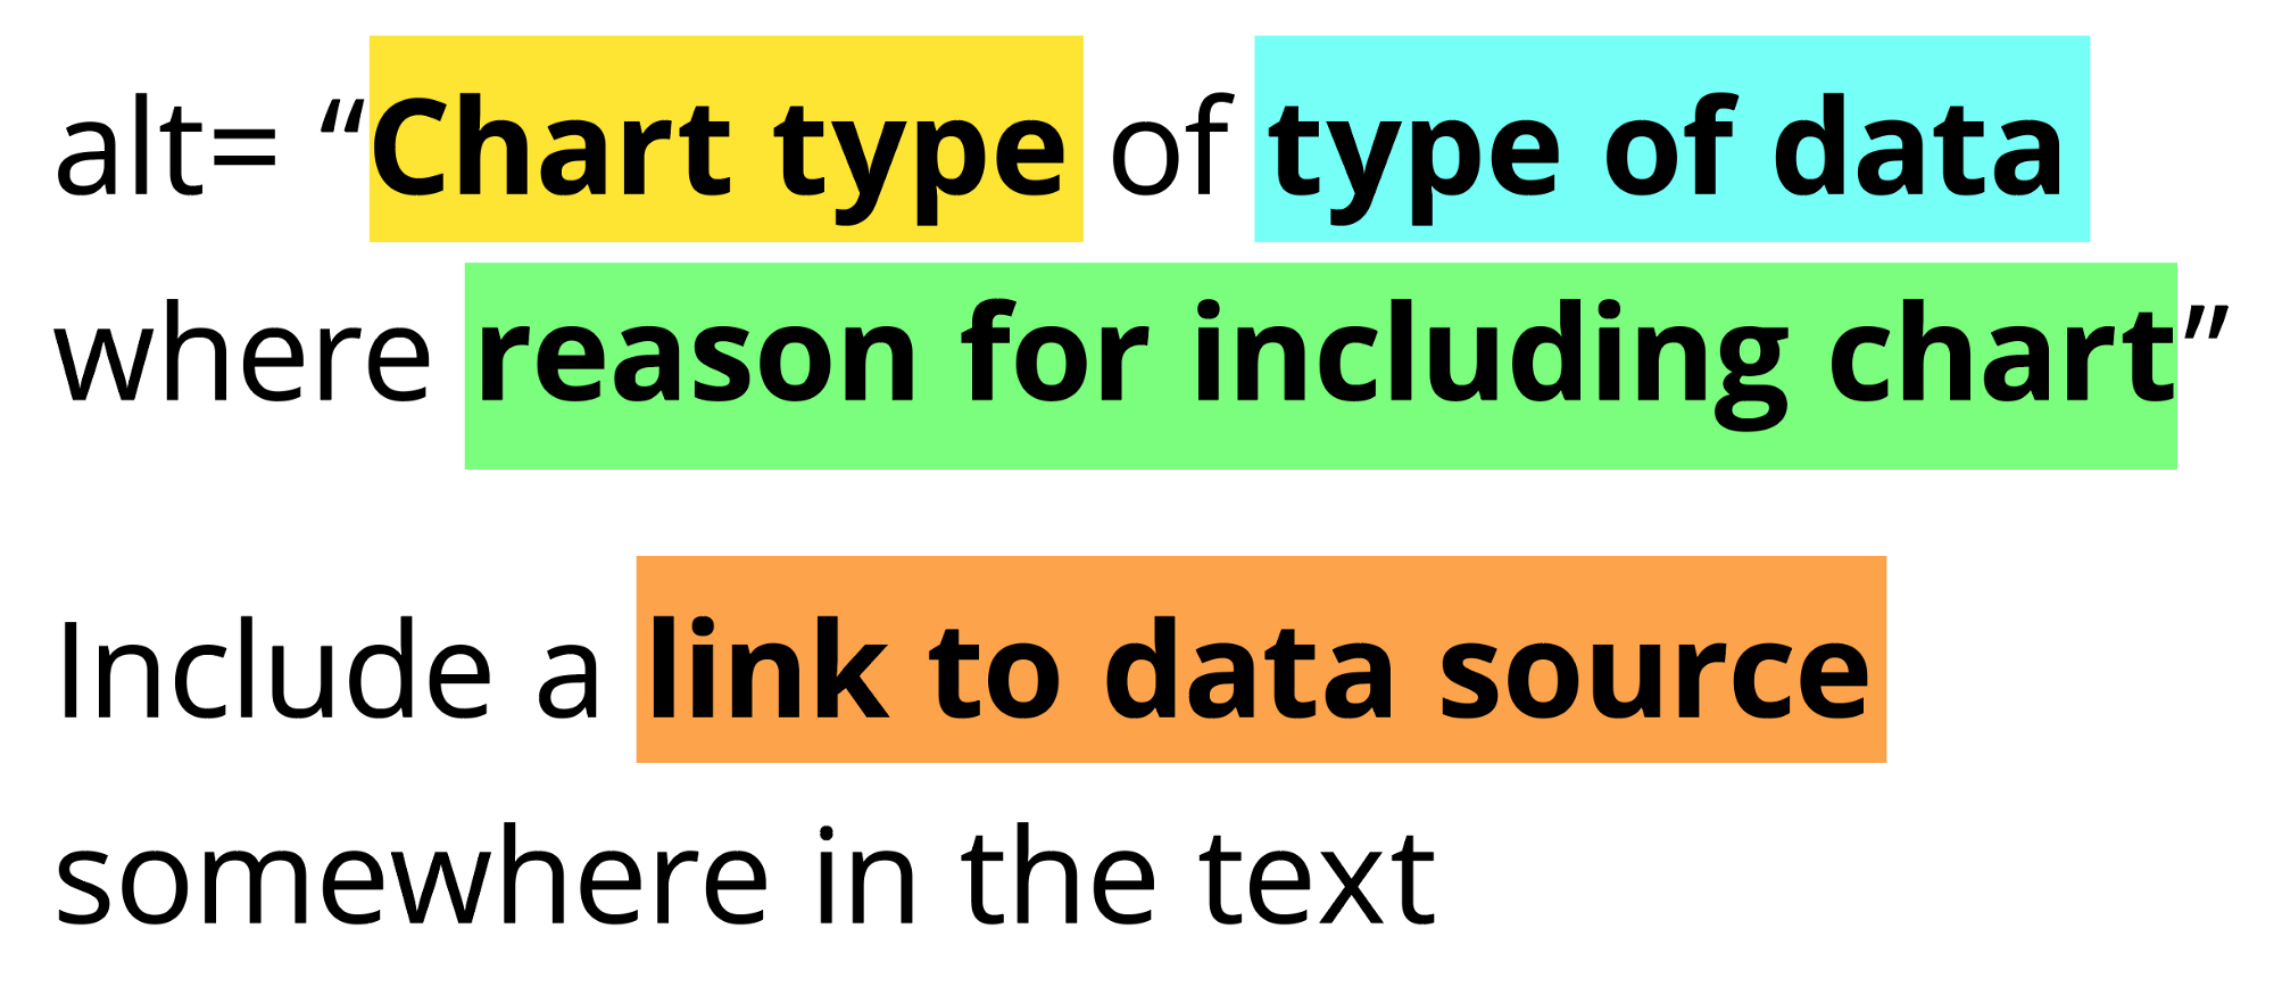 Example alt text format that reads: Chart type of type of data where reason for including chart. Also the recommendation to include a link to the data source somewhere in the text.